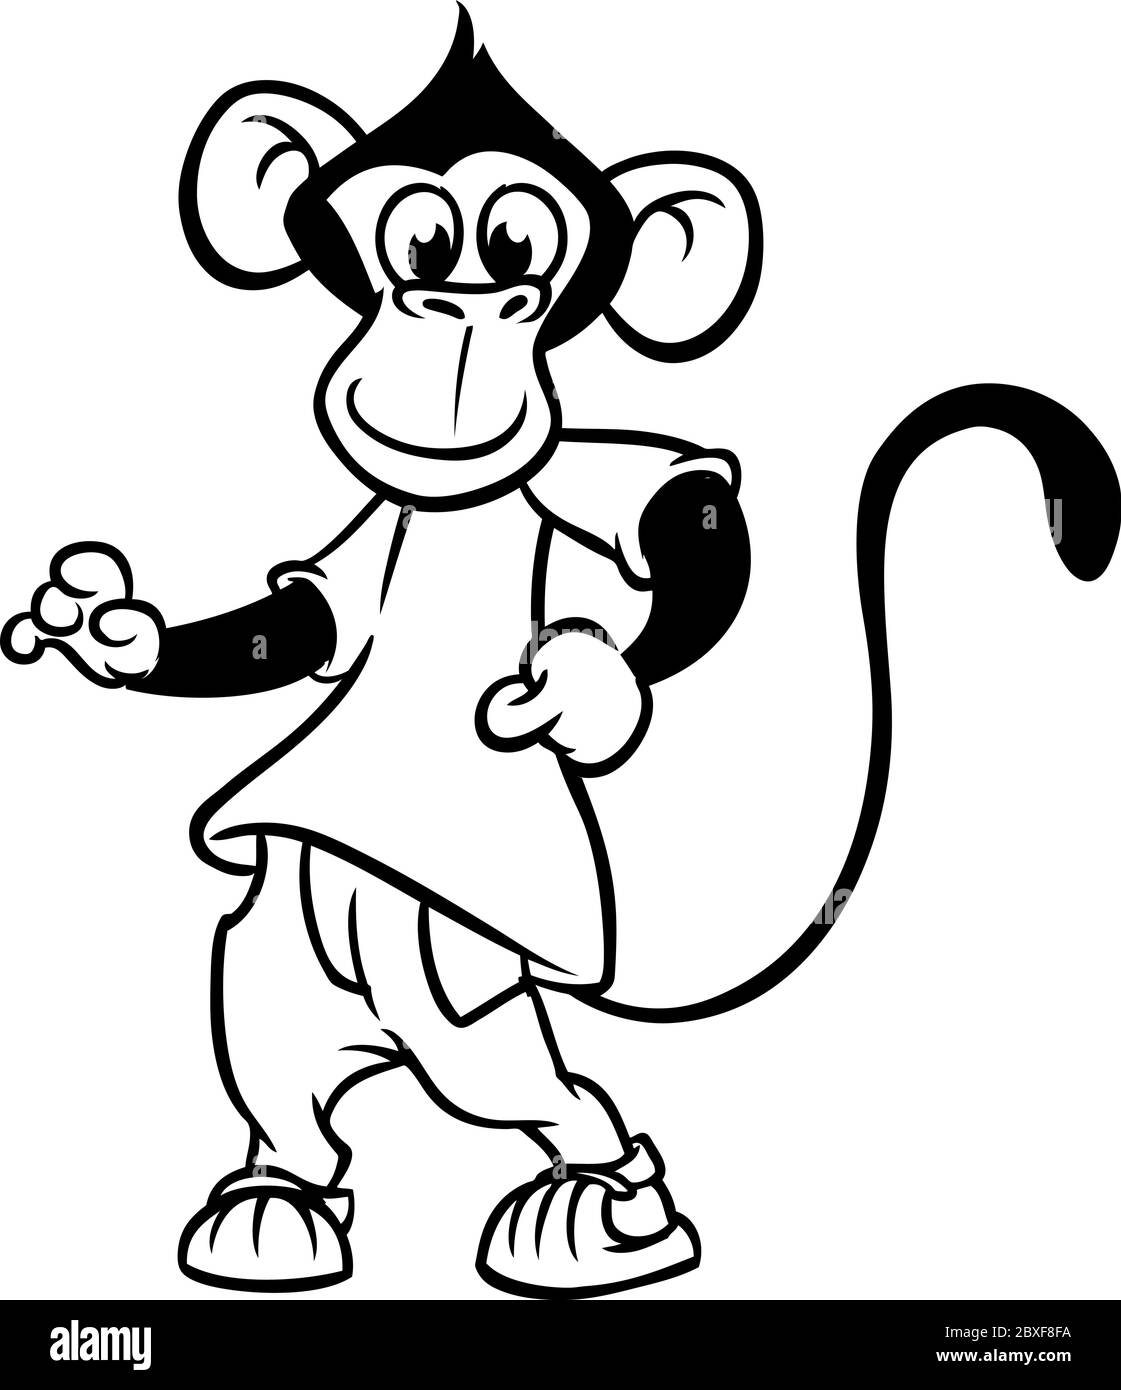 Cartoon monkey chimpanzee dancing. Vector illustration outlined. Design for coloring book Stock Vector